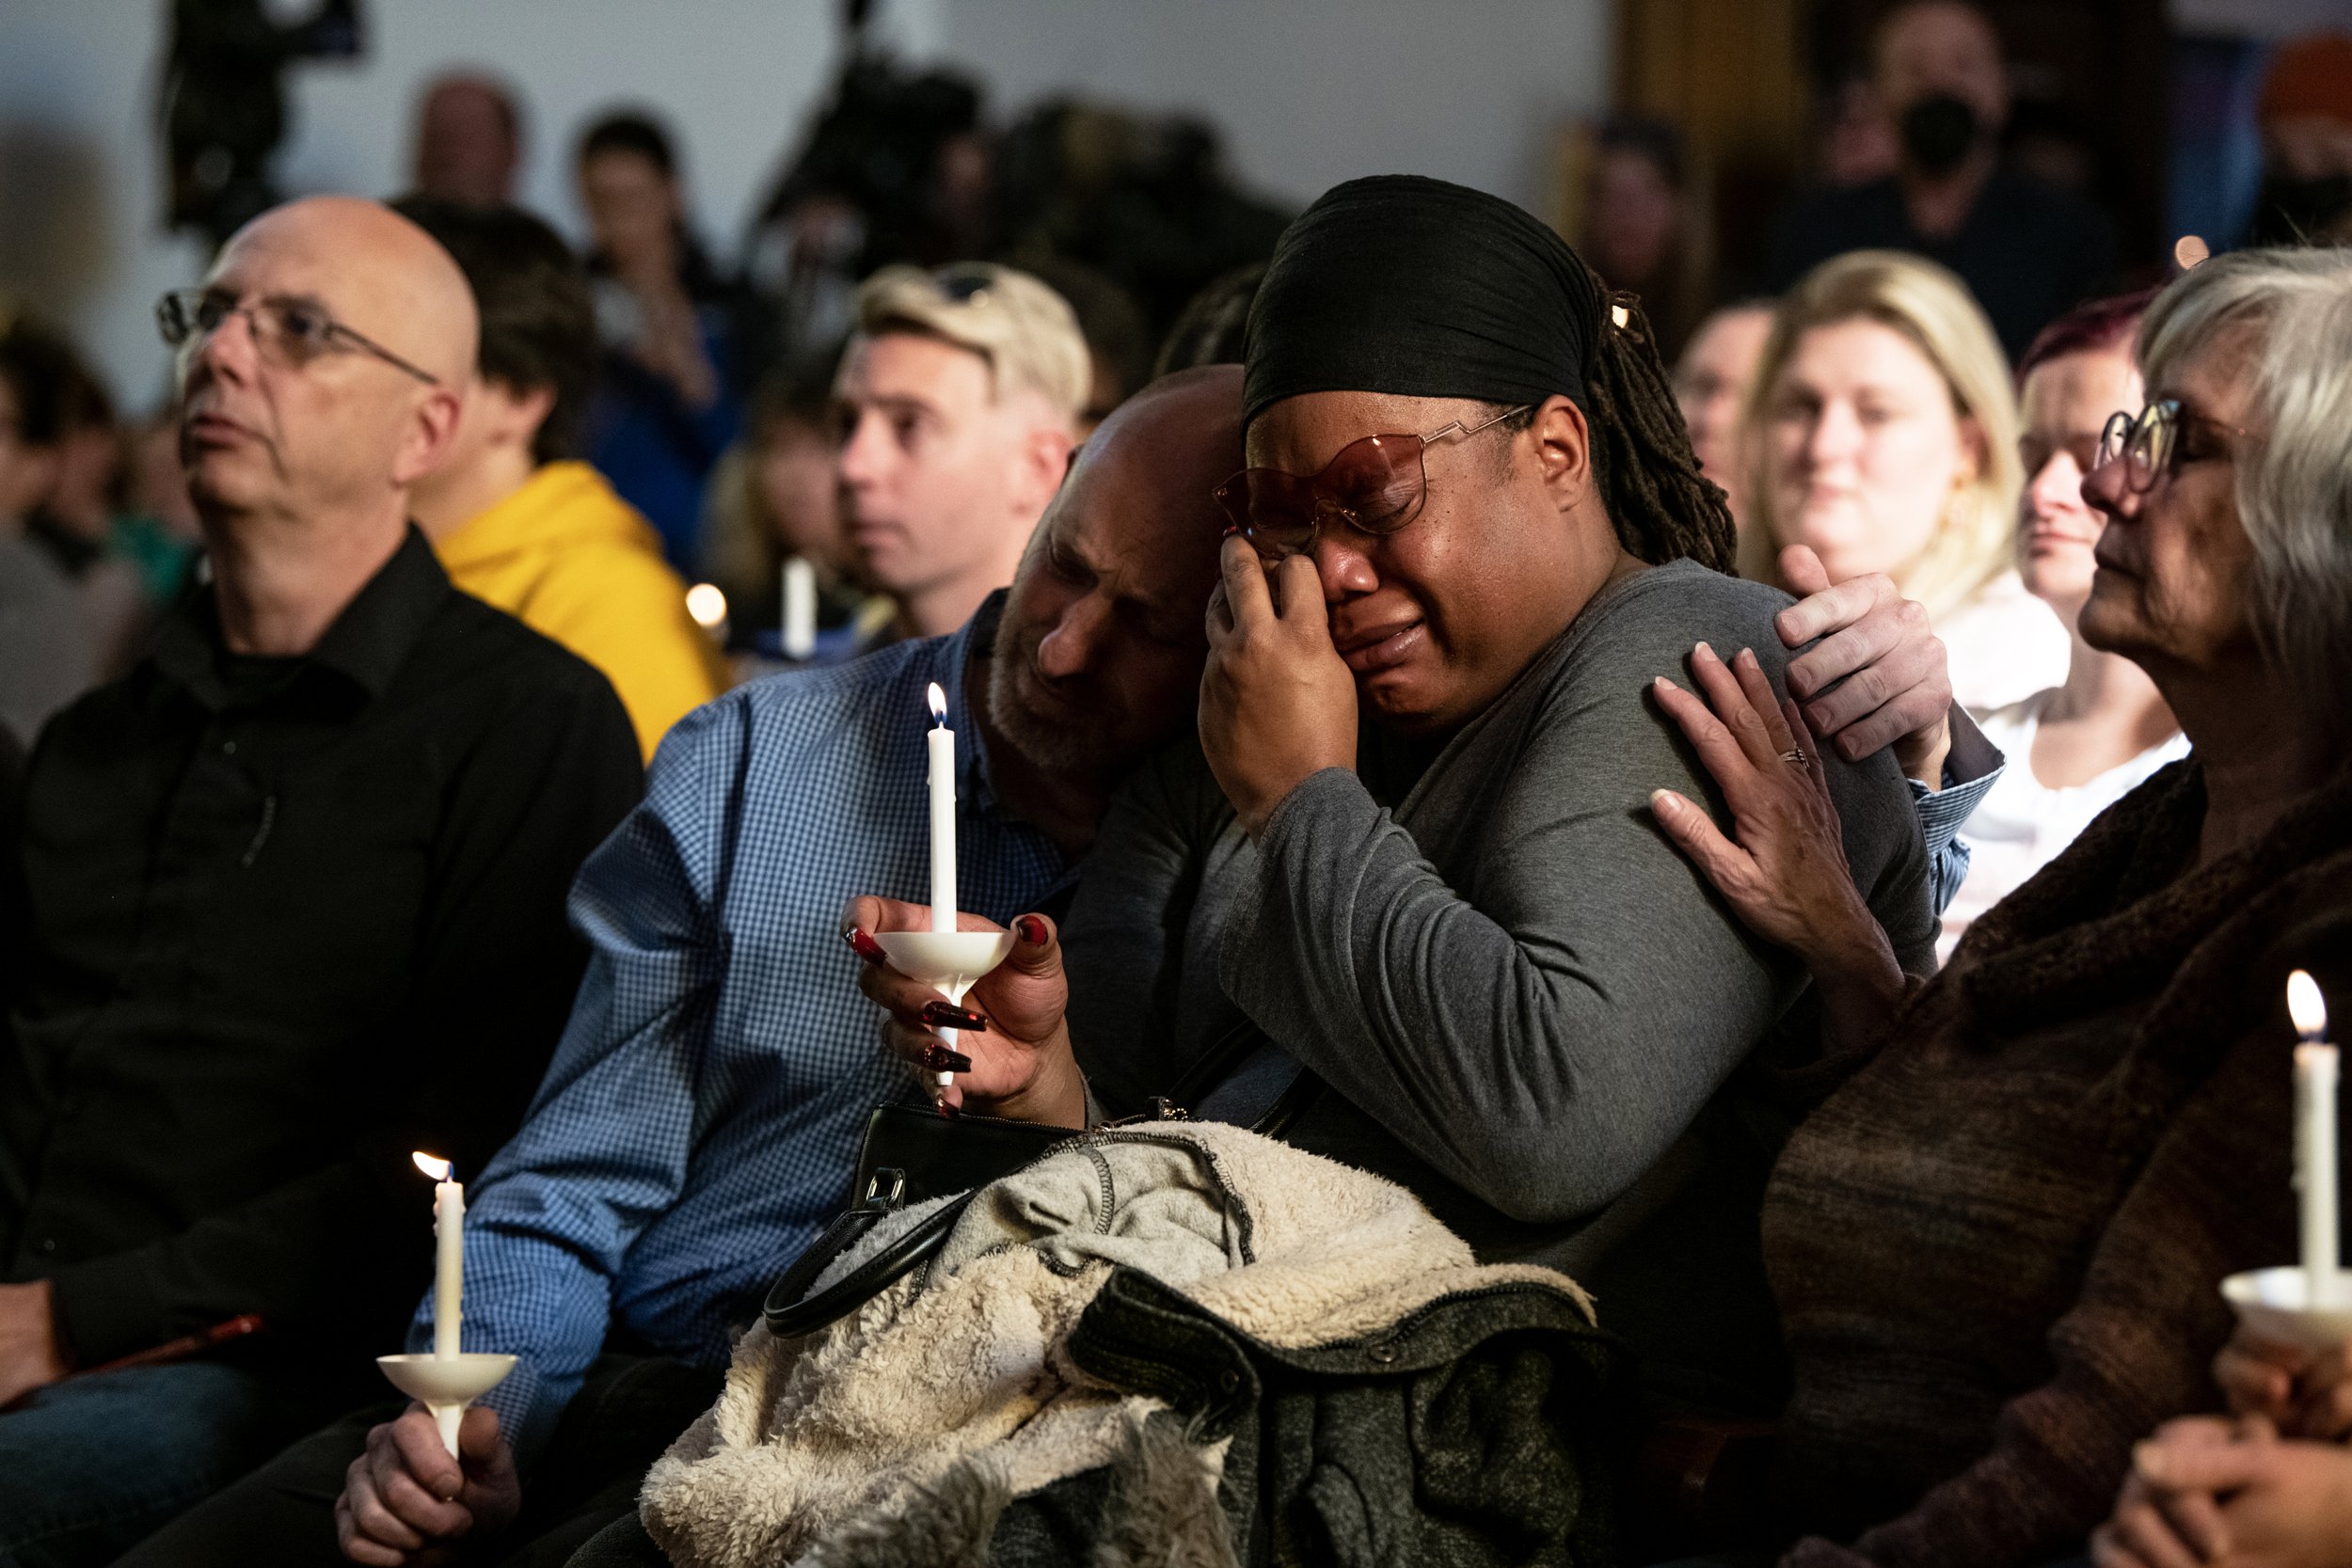  Tyrice Kelley, center right, a performer at Club Q, is comforted by Nic Grzecka, center left, one of the club’s owners, during a service held at All Souls Unitarian Church for people to mourn on Sunday, Nov. 20, 2022, following the mass shooting tha